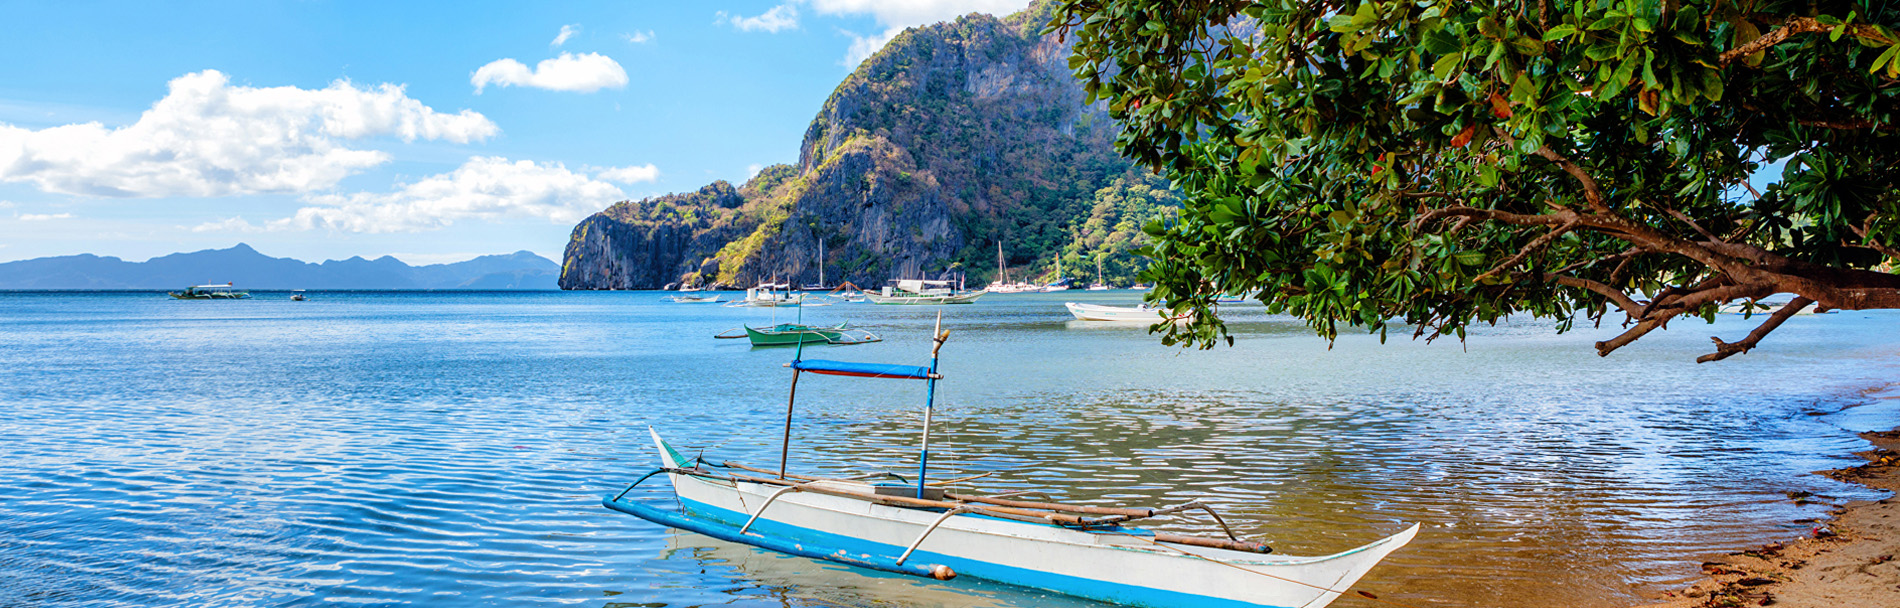 Philippines Tour Package - 4 Nights